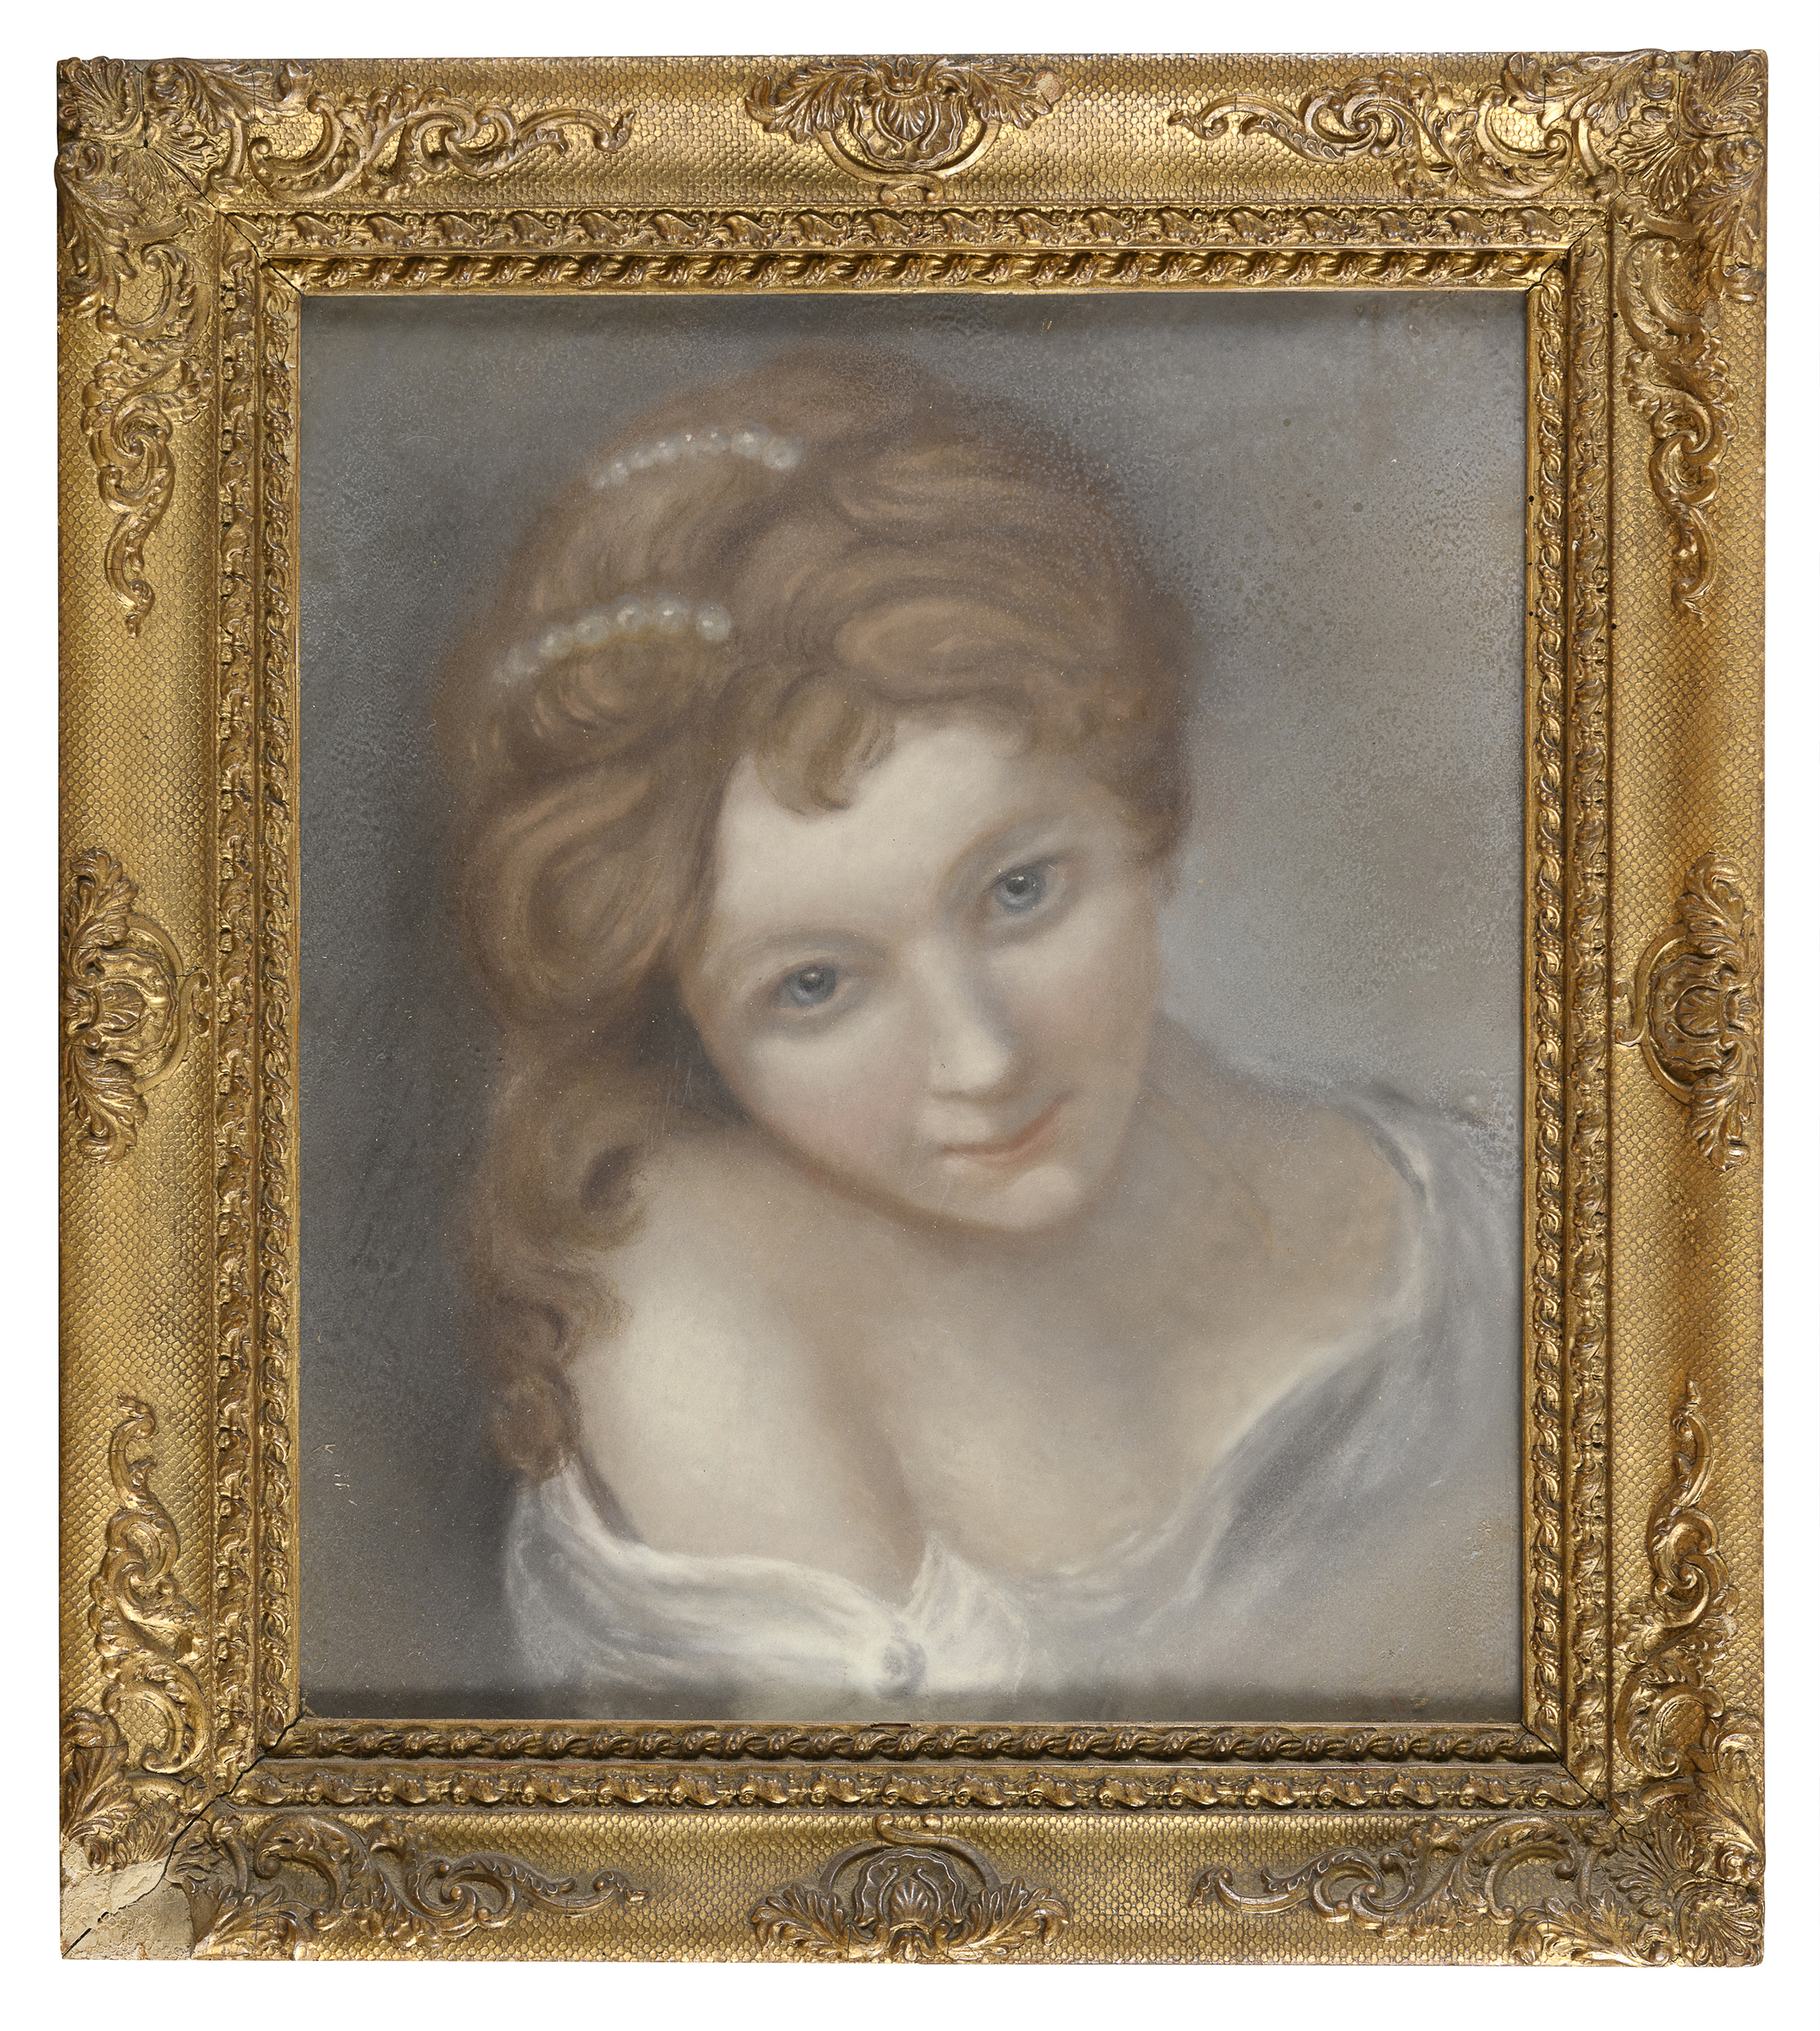 FRENCH PASTEL DRAWING EARLY 19TH CENTURY